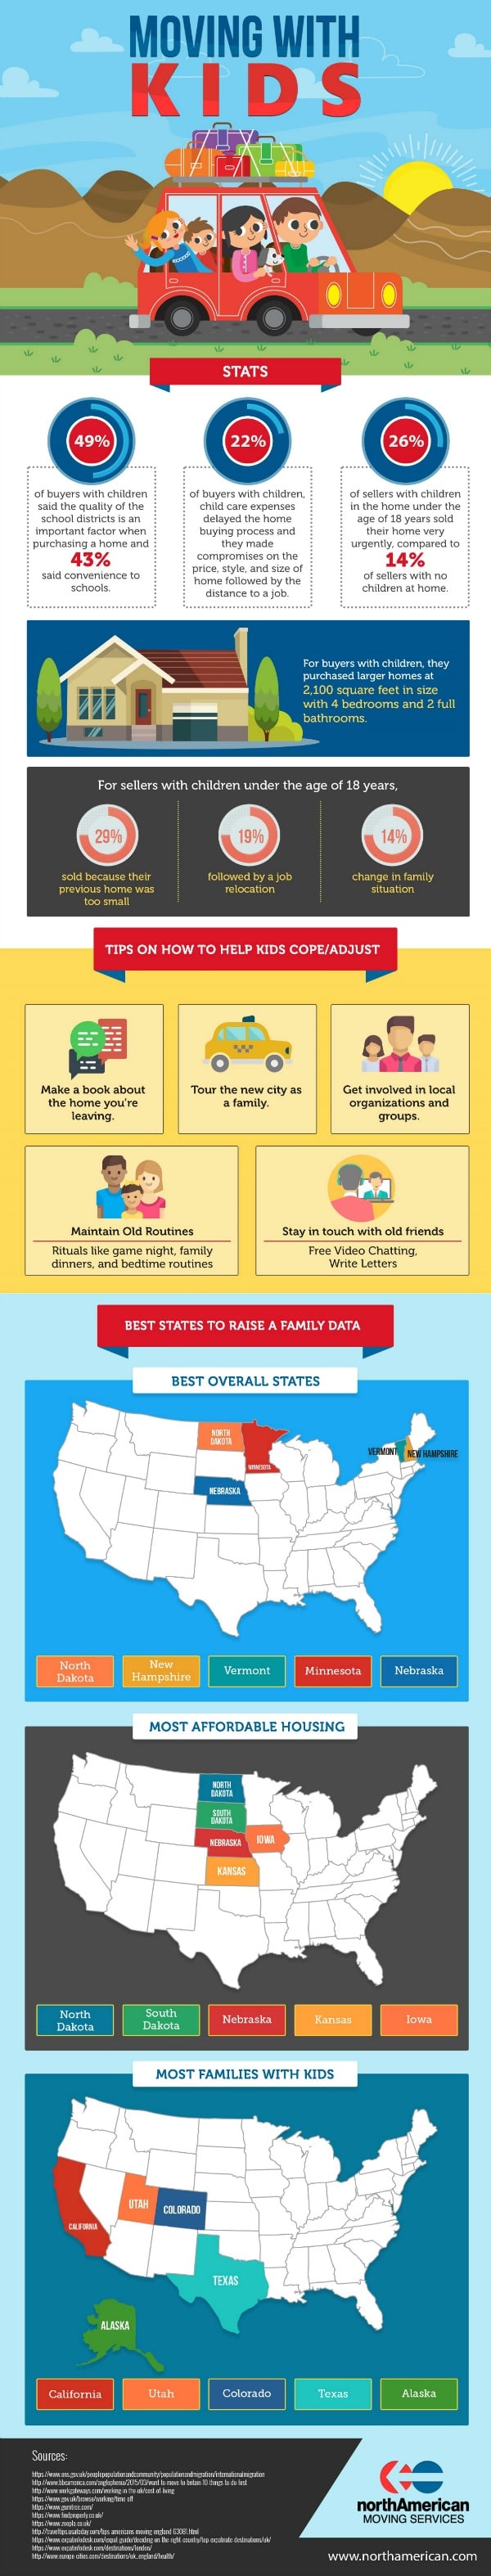 Moving with kids infographic